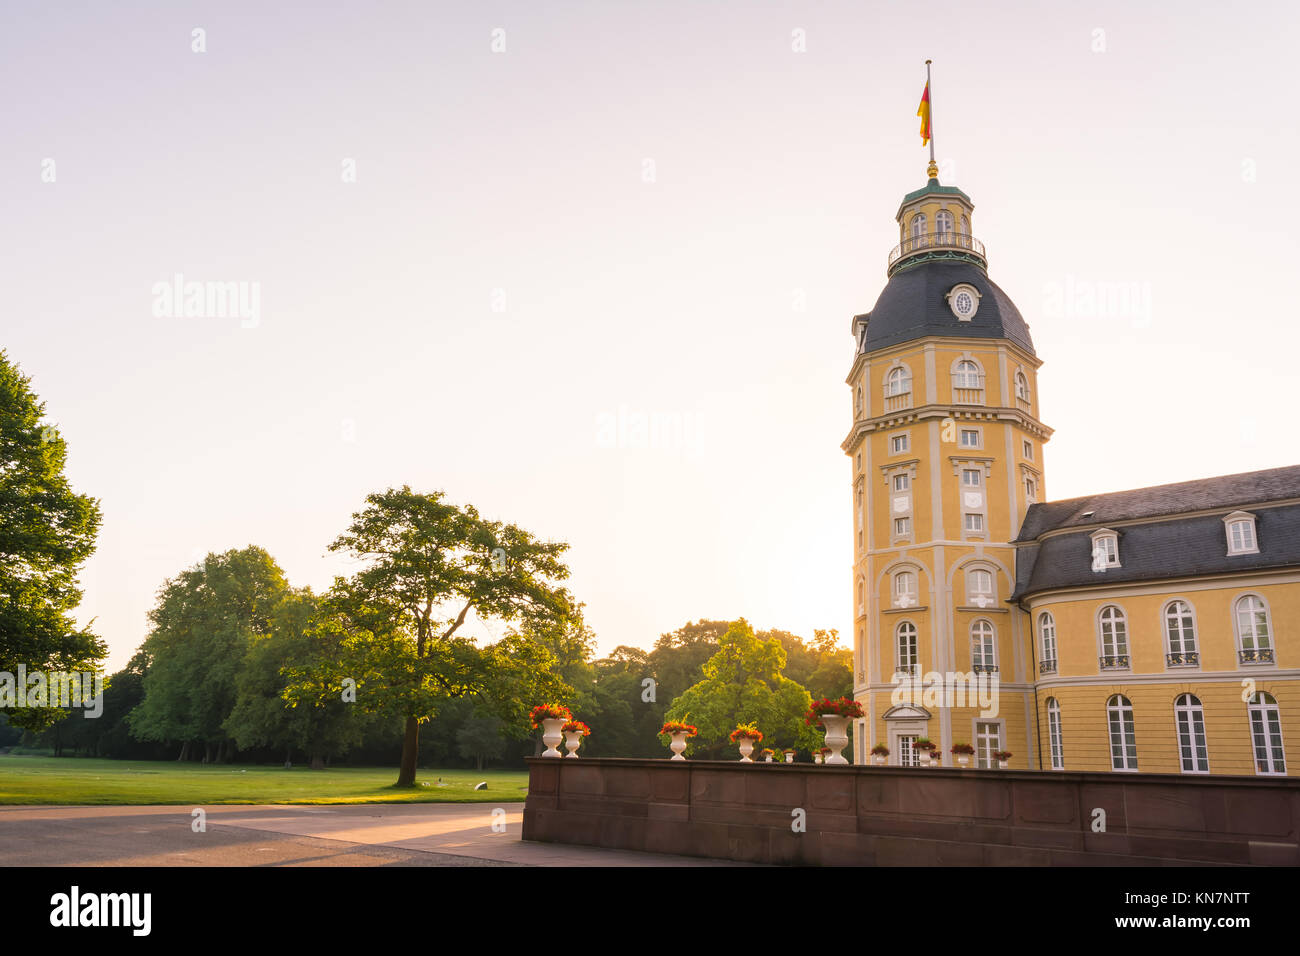 North Side of Karlsruhe Palace Castle Schloss in Germany Blauer Strahl Architecture Stock Photo